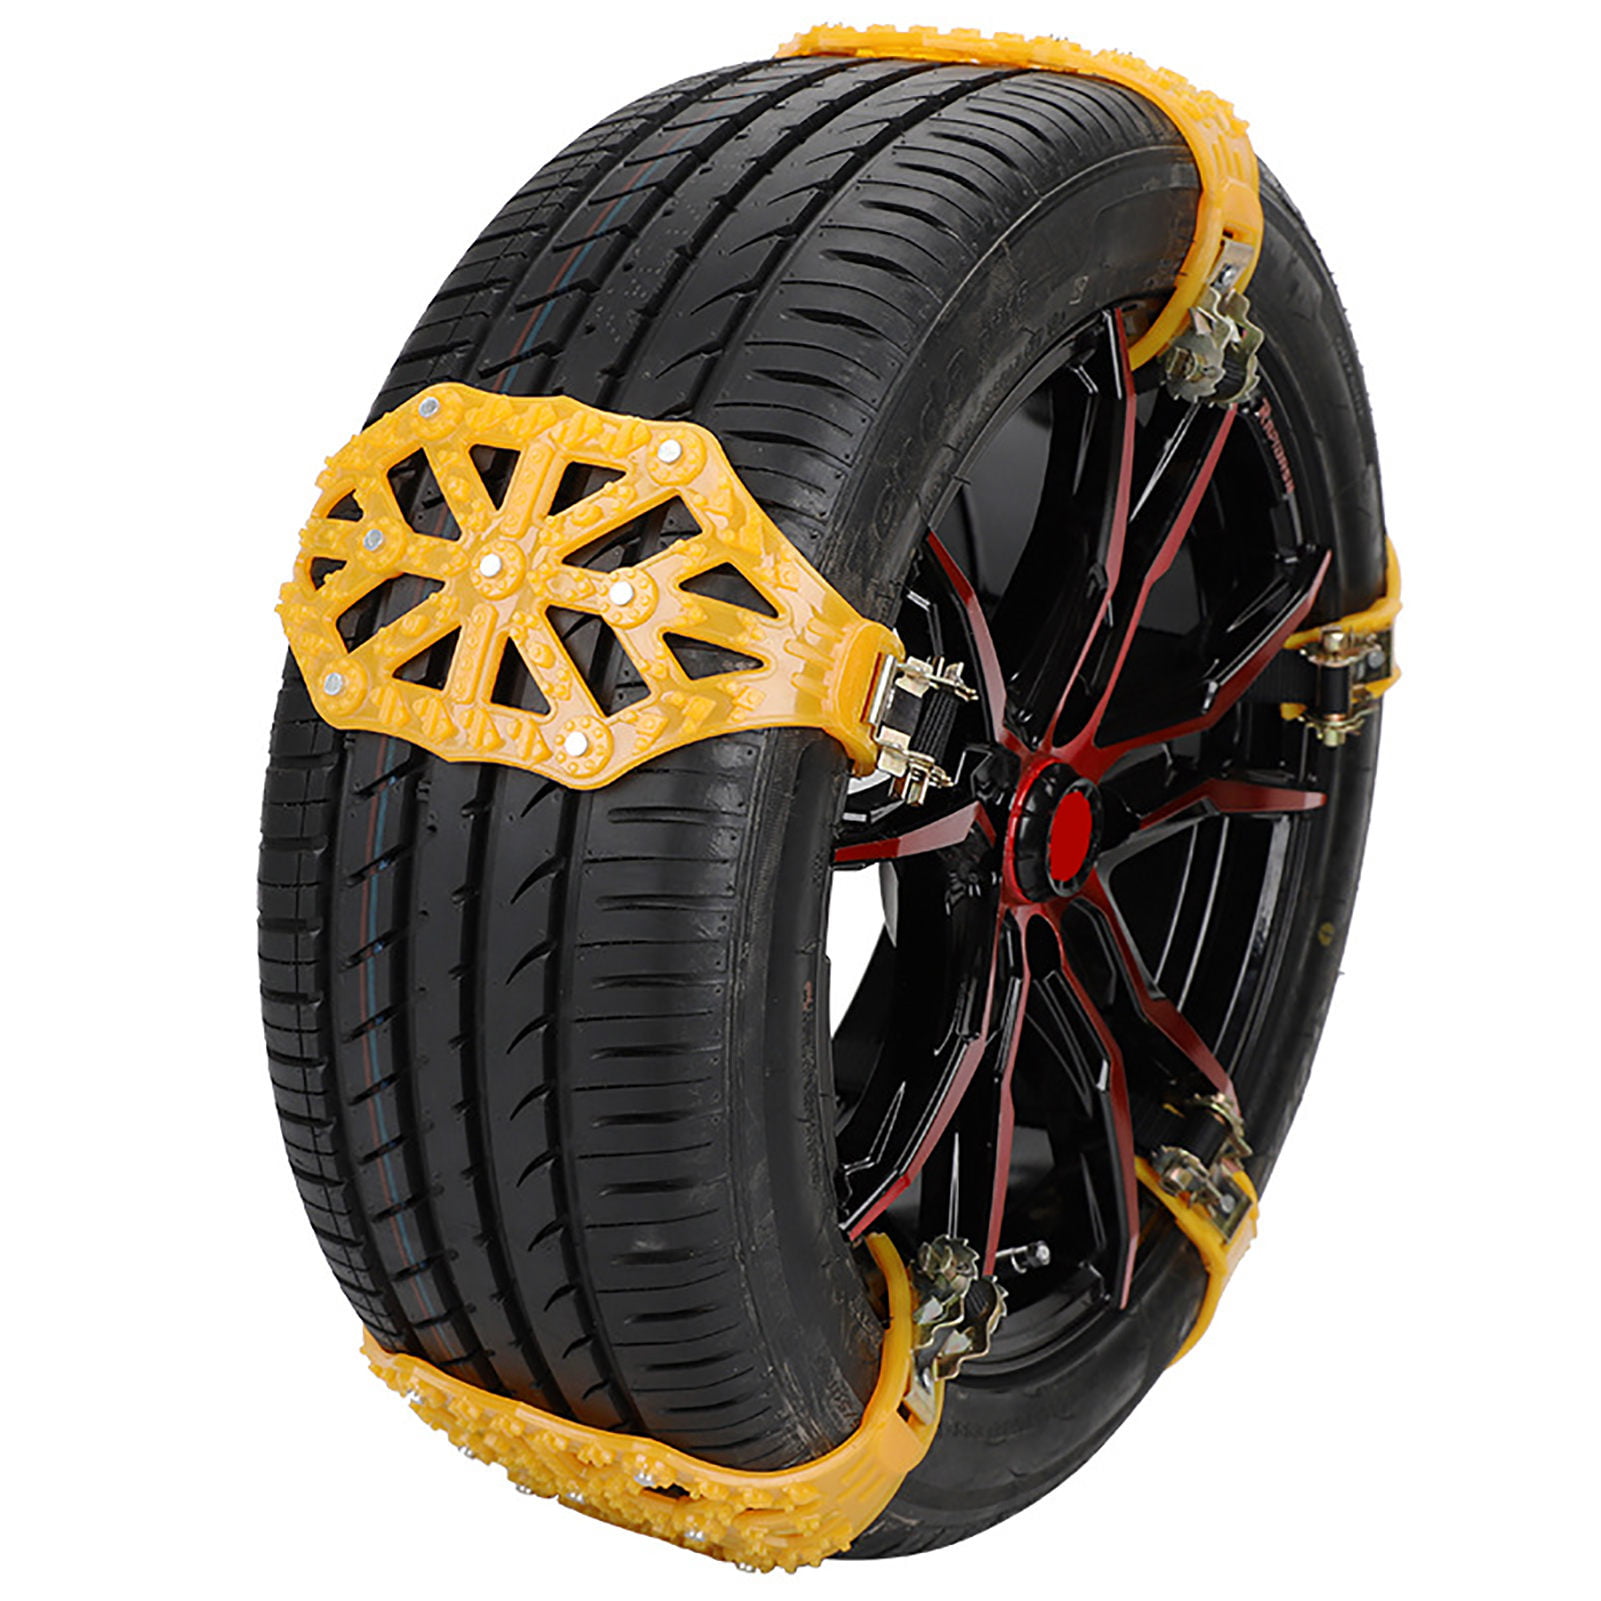 Anti-skid Snow Chains For Tyres, Truck Emergency Tire Chain, Car Snow Chain,  Truck Tire Chain, Portable Car Snow Chain, For Most Pickups, Suvs, Trucks